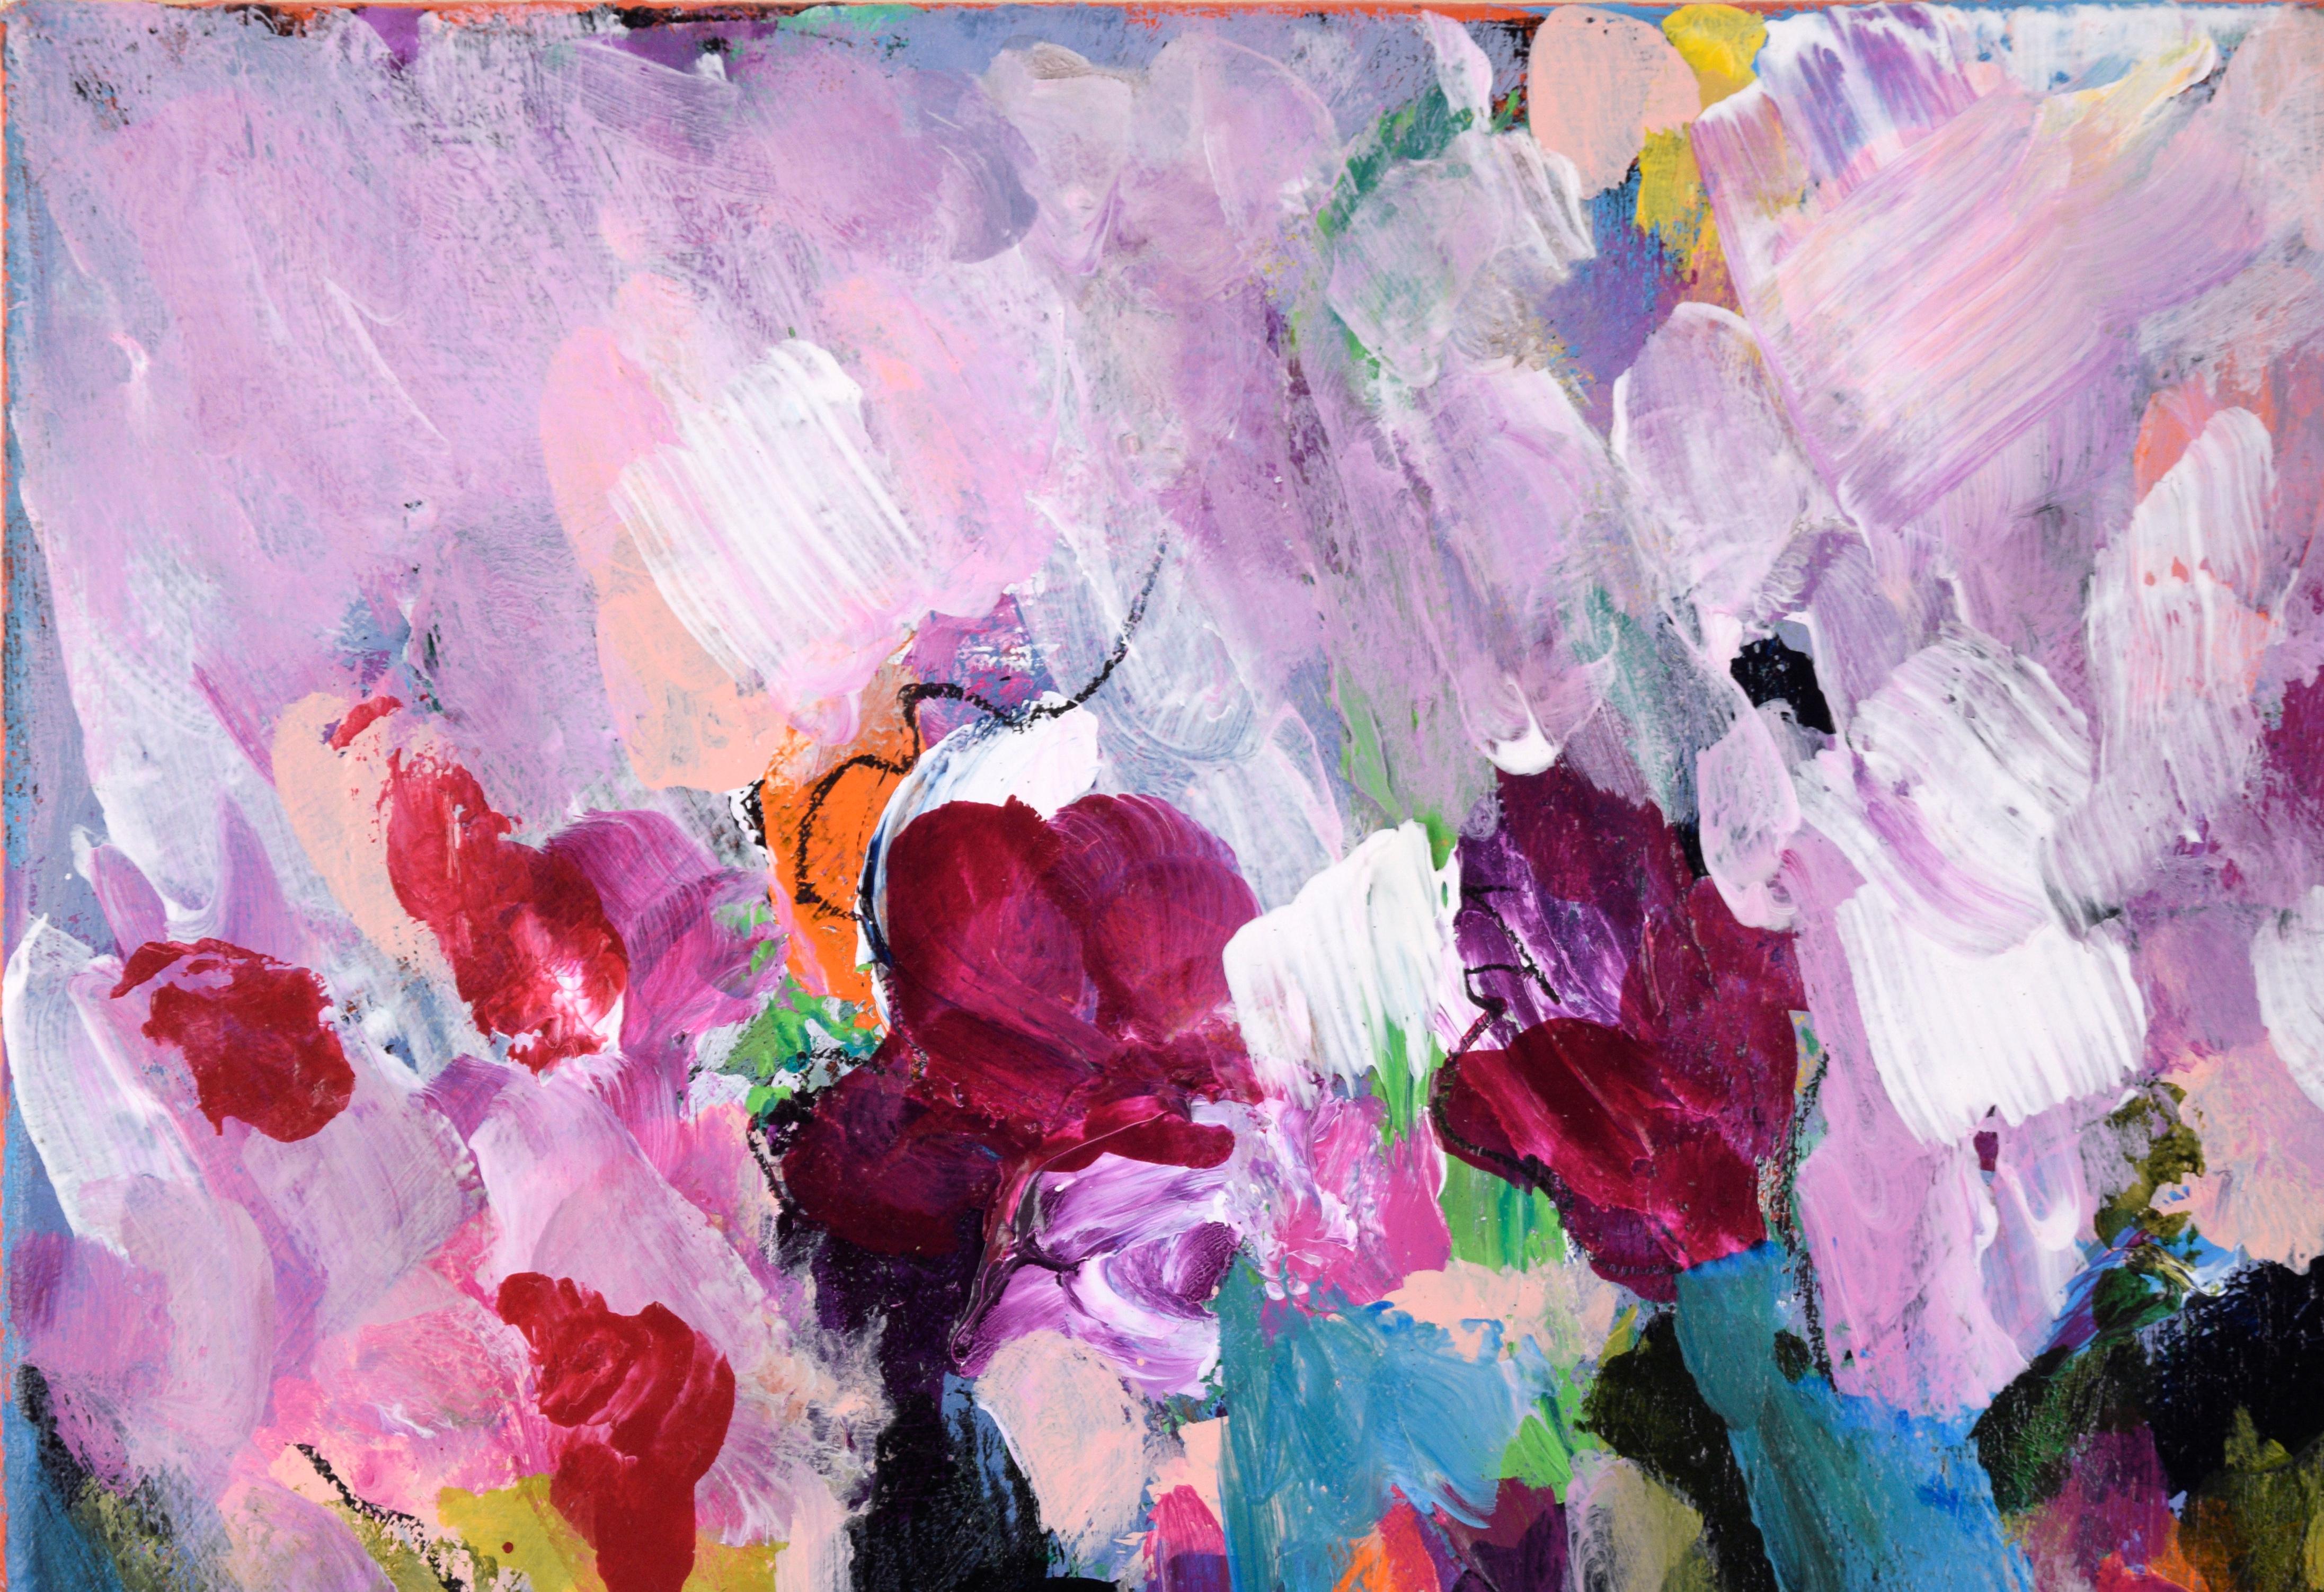 Abstracted Field of Tulips - Painting by Ilana Ingber